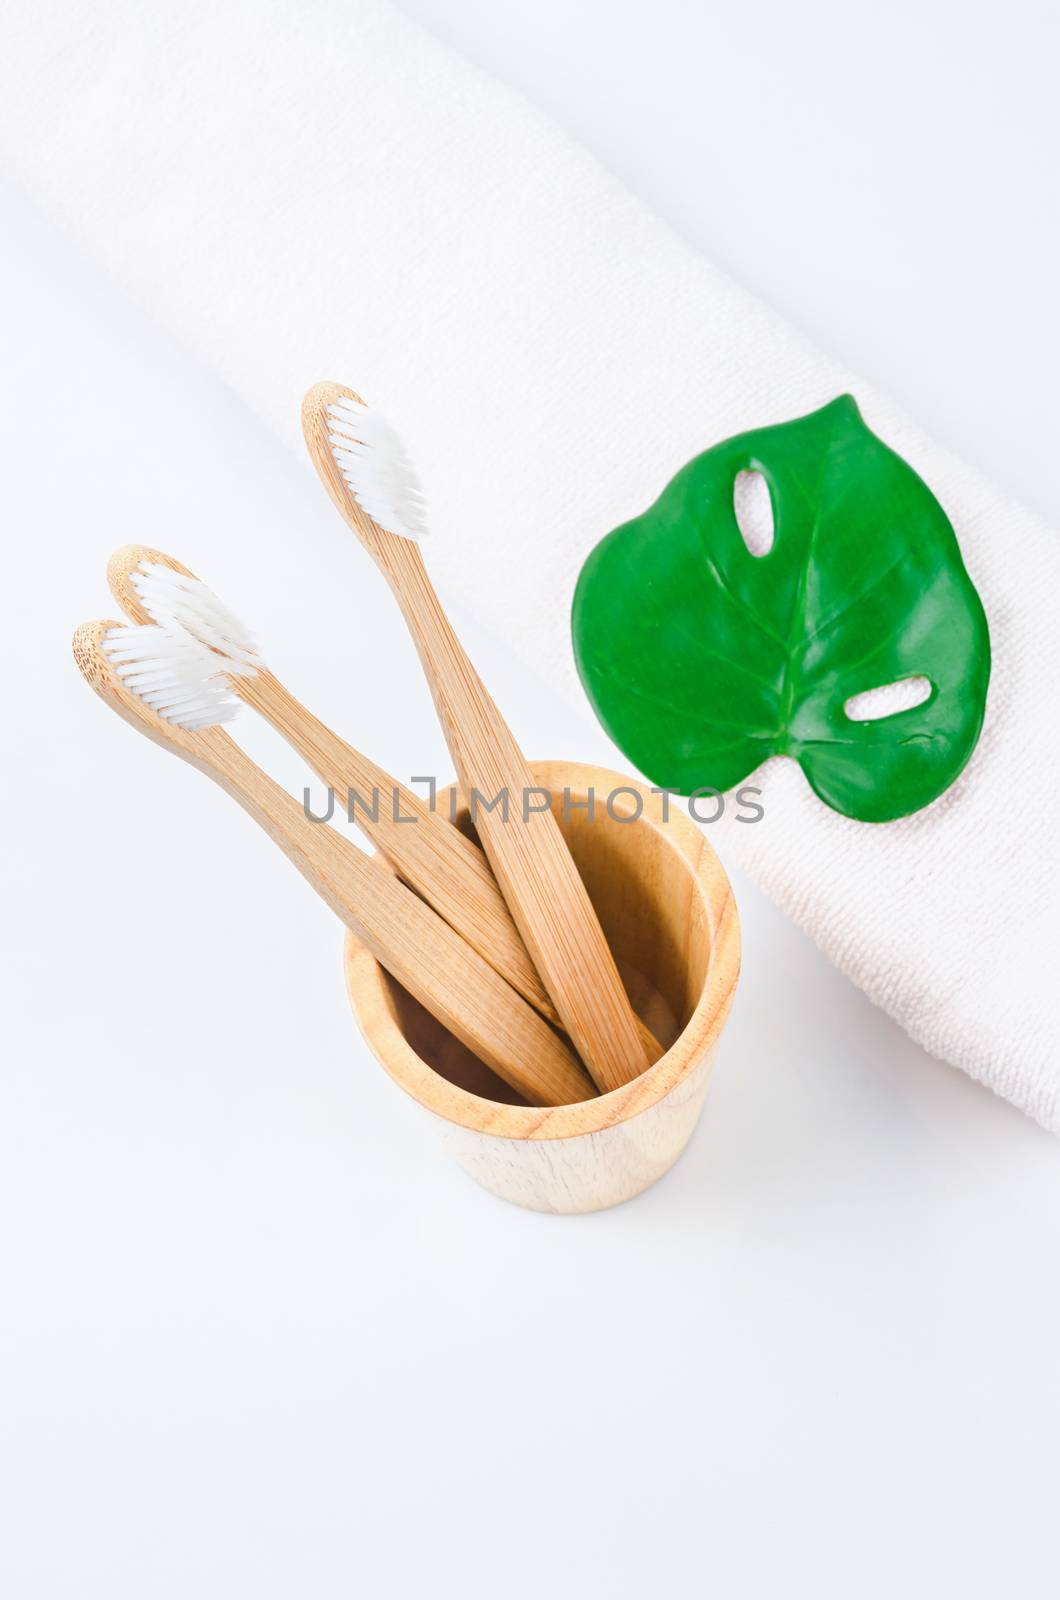 Bamboo toothbrushes in wooden glass with towel. by Gamjai